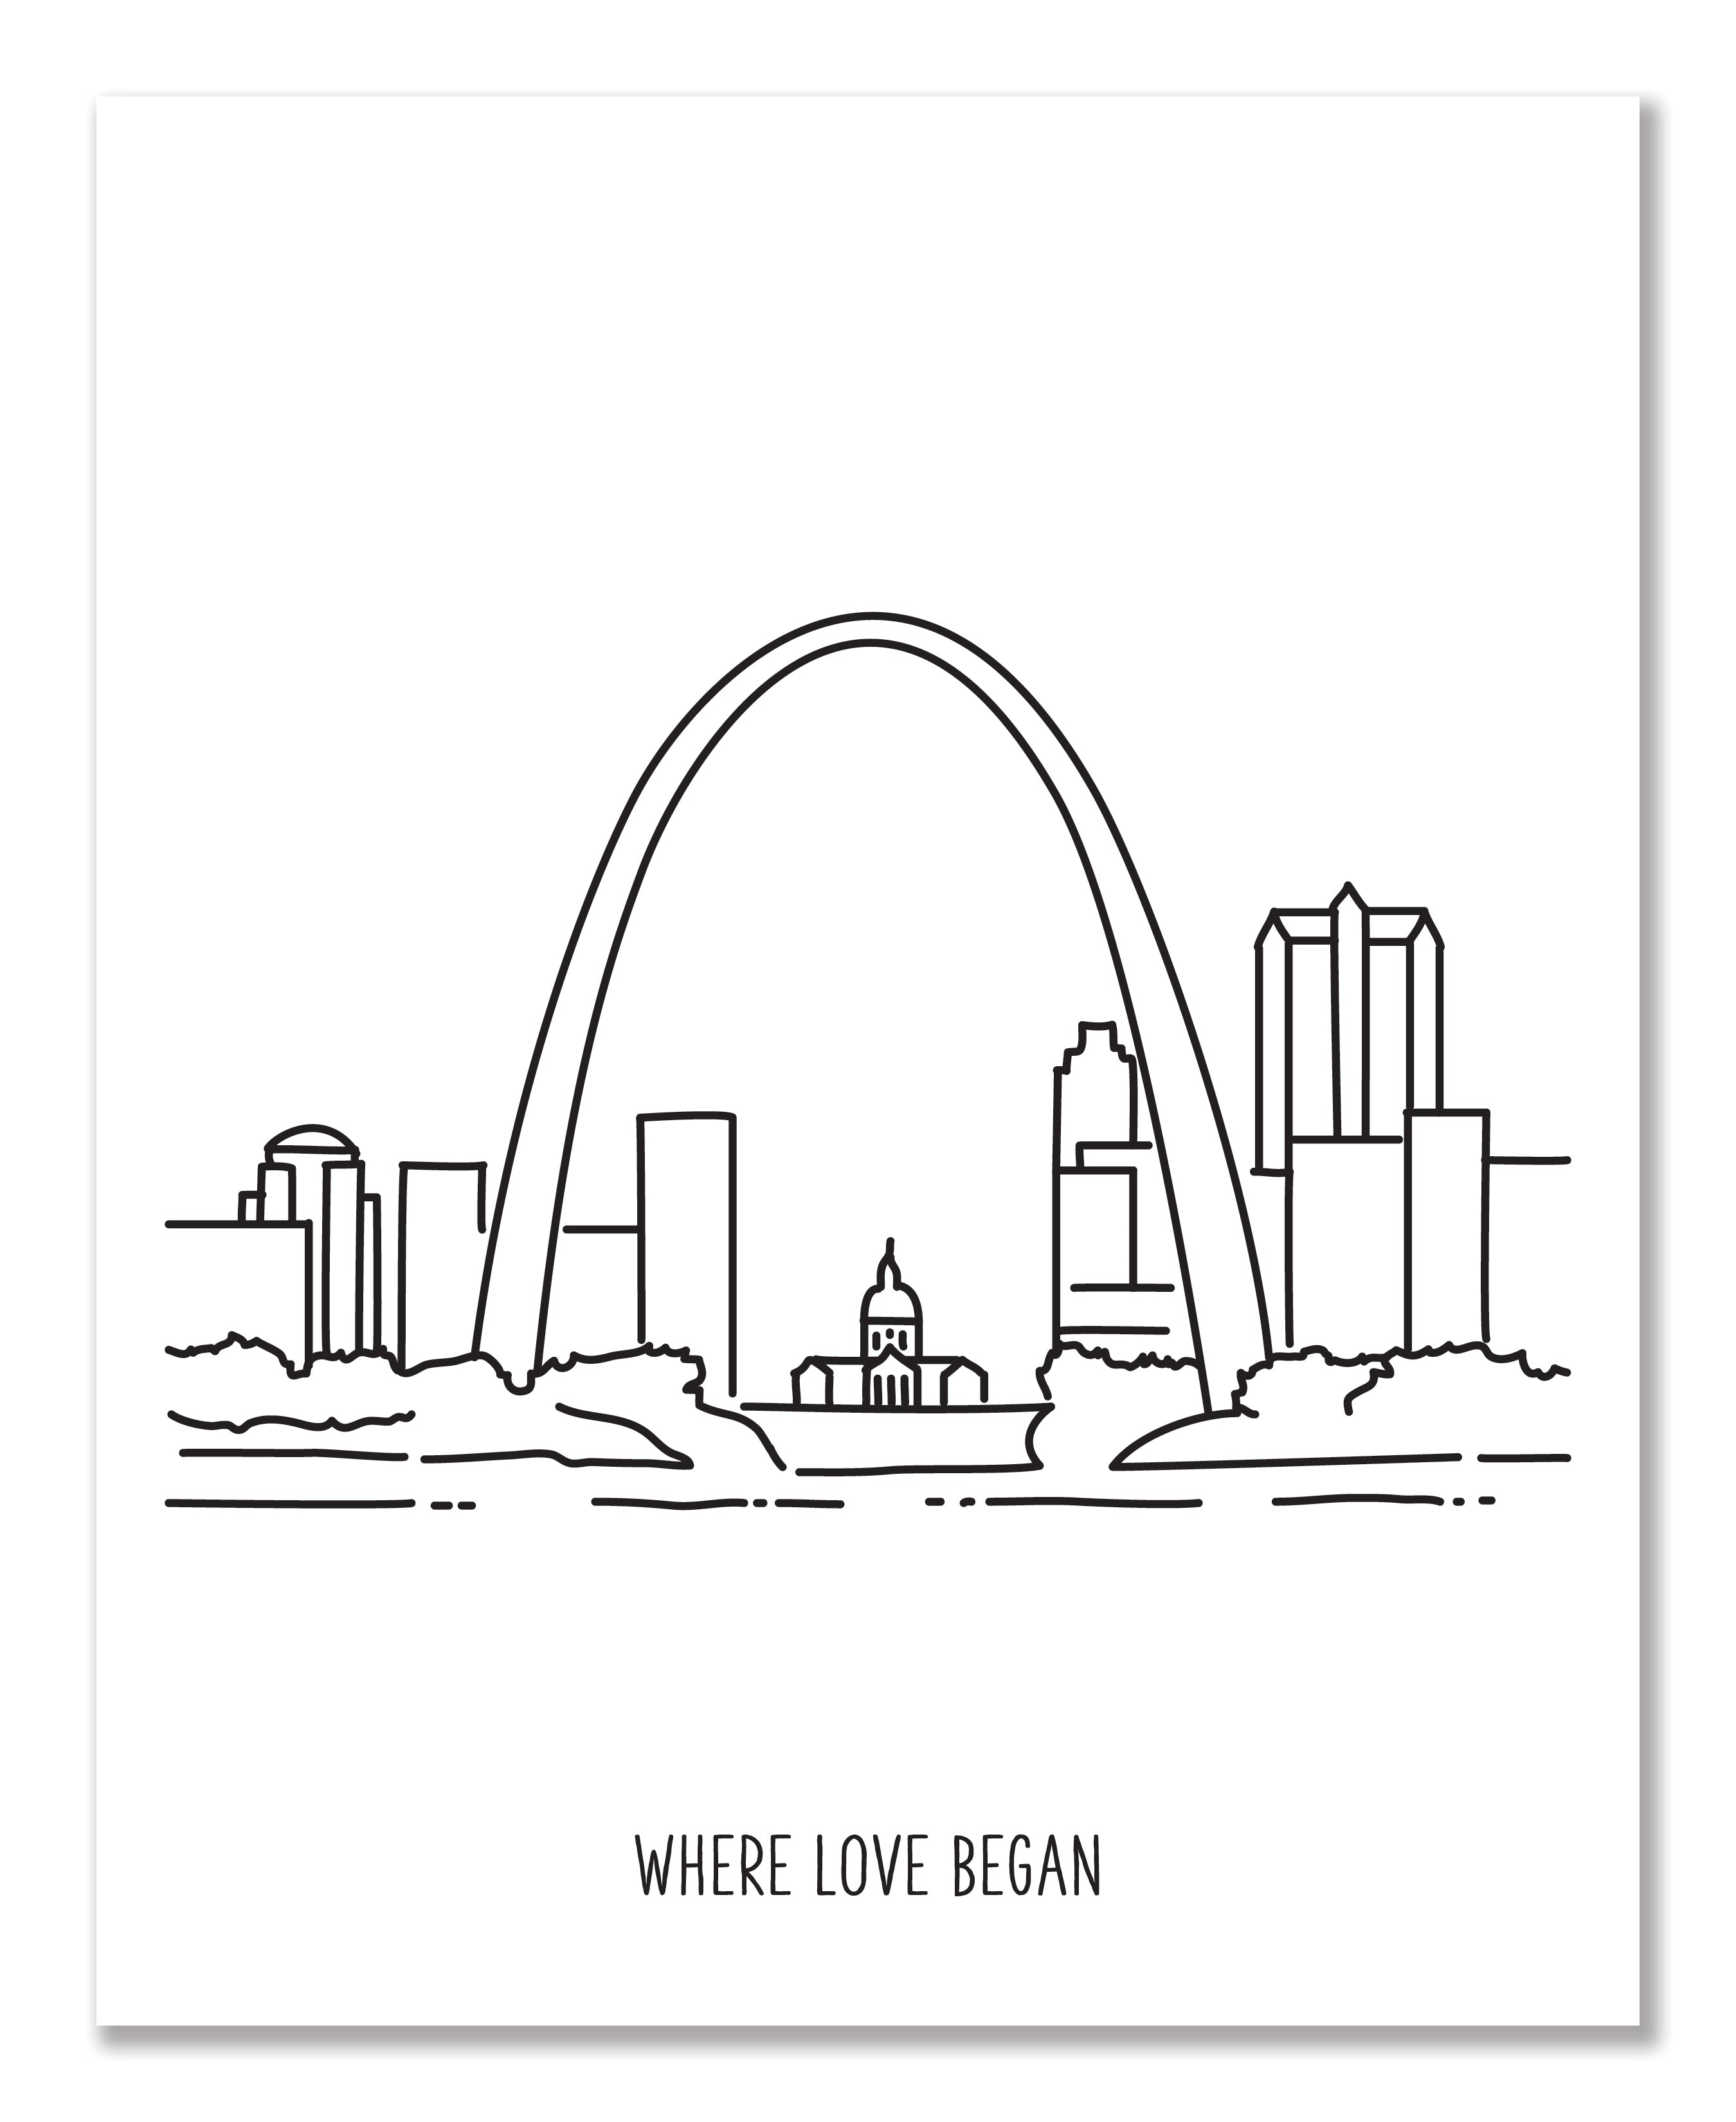 A line drawing of the Saint Louis Skyline with a custom title